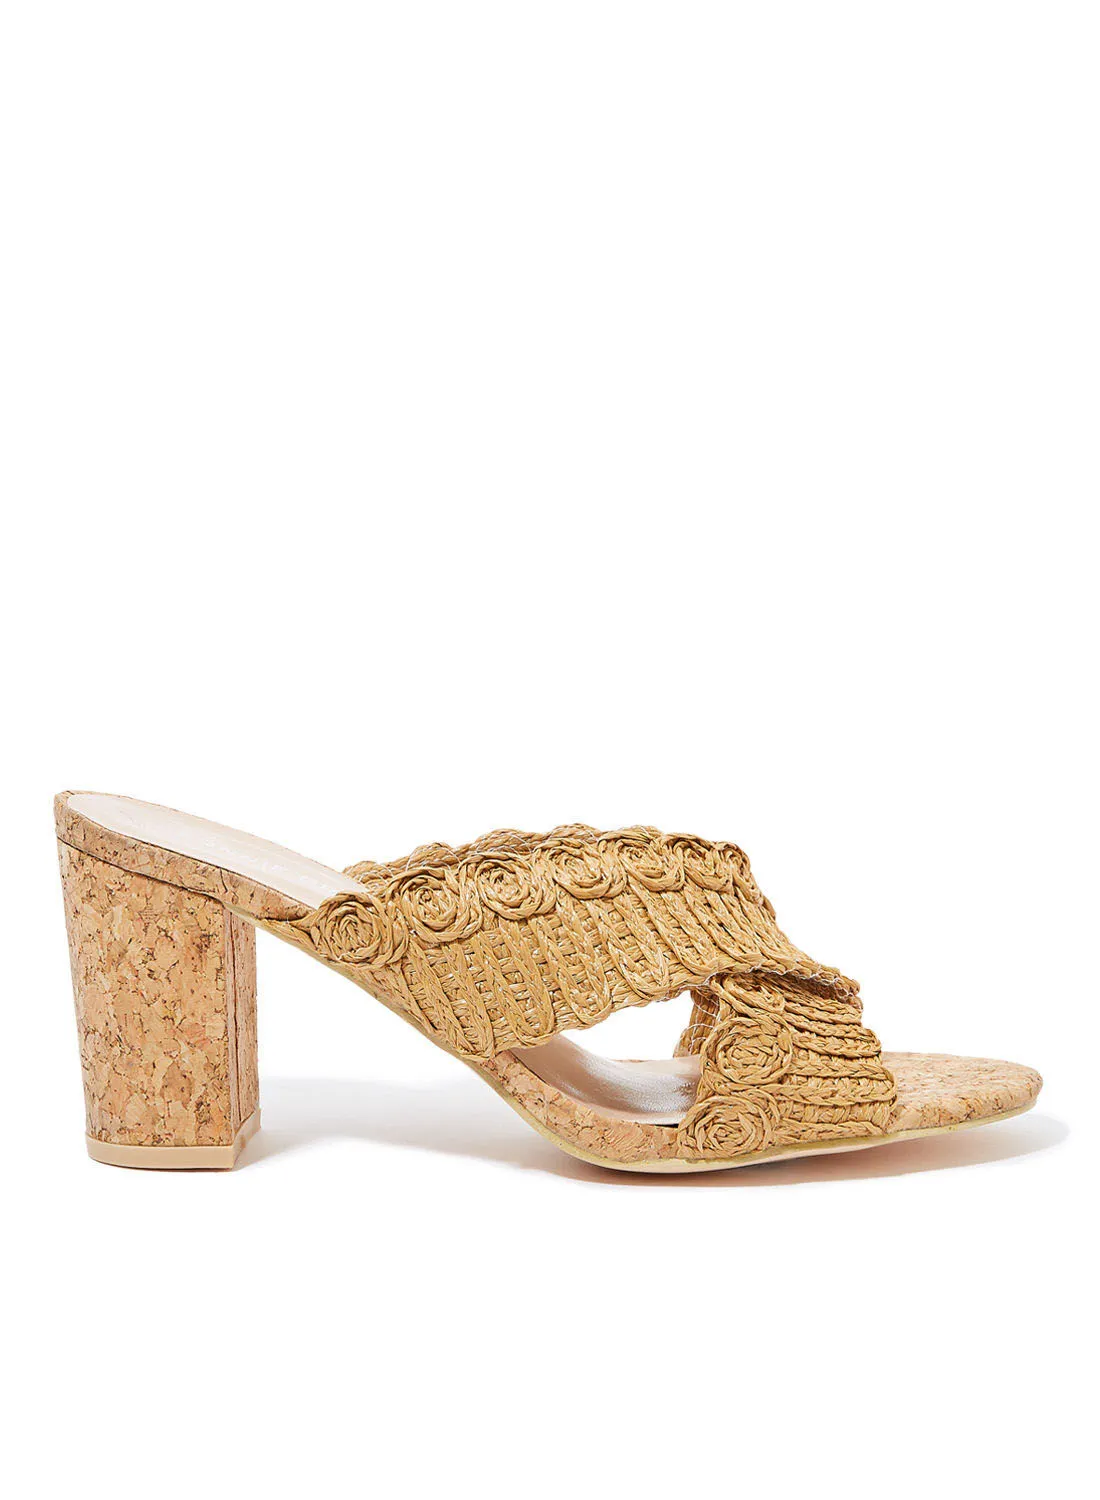 Ronnie Grey Knit Top Sandals Camel